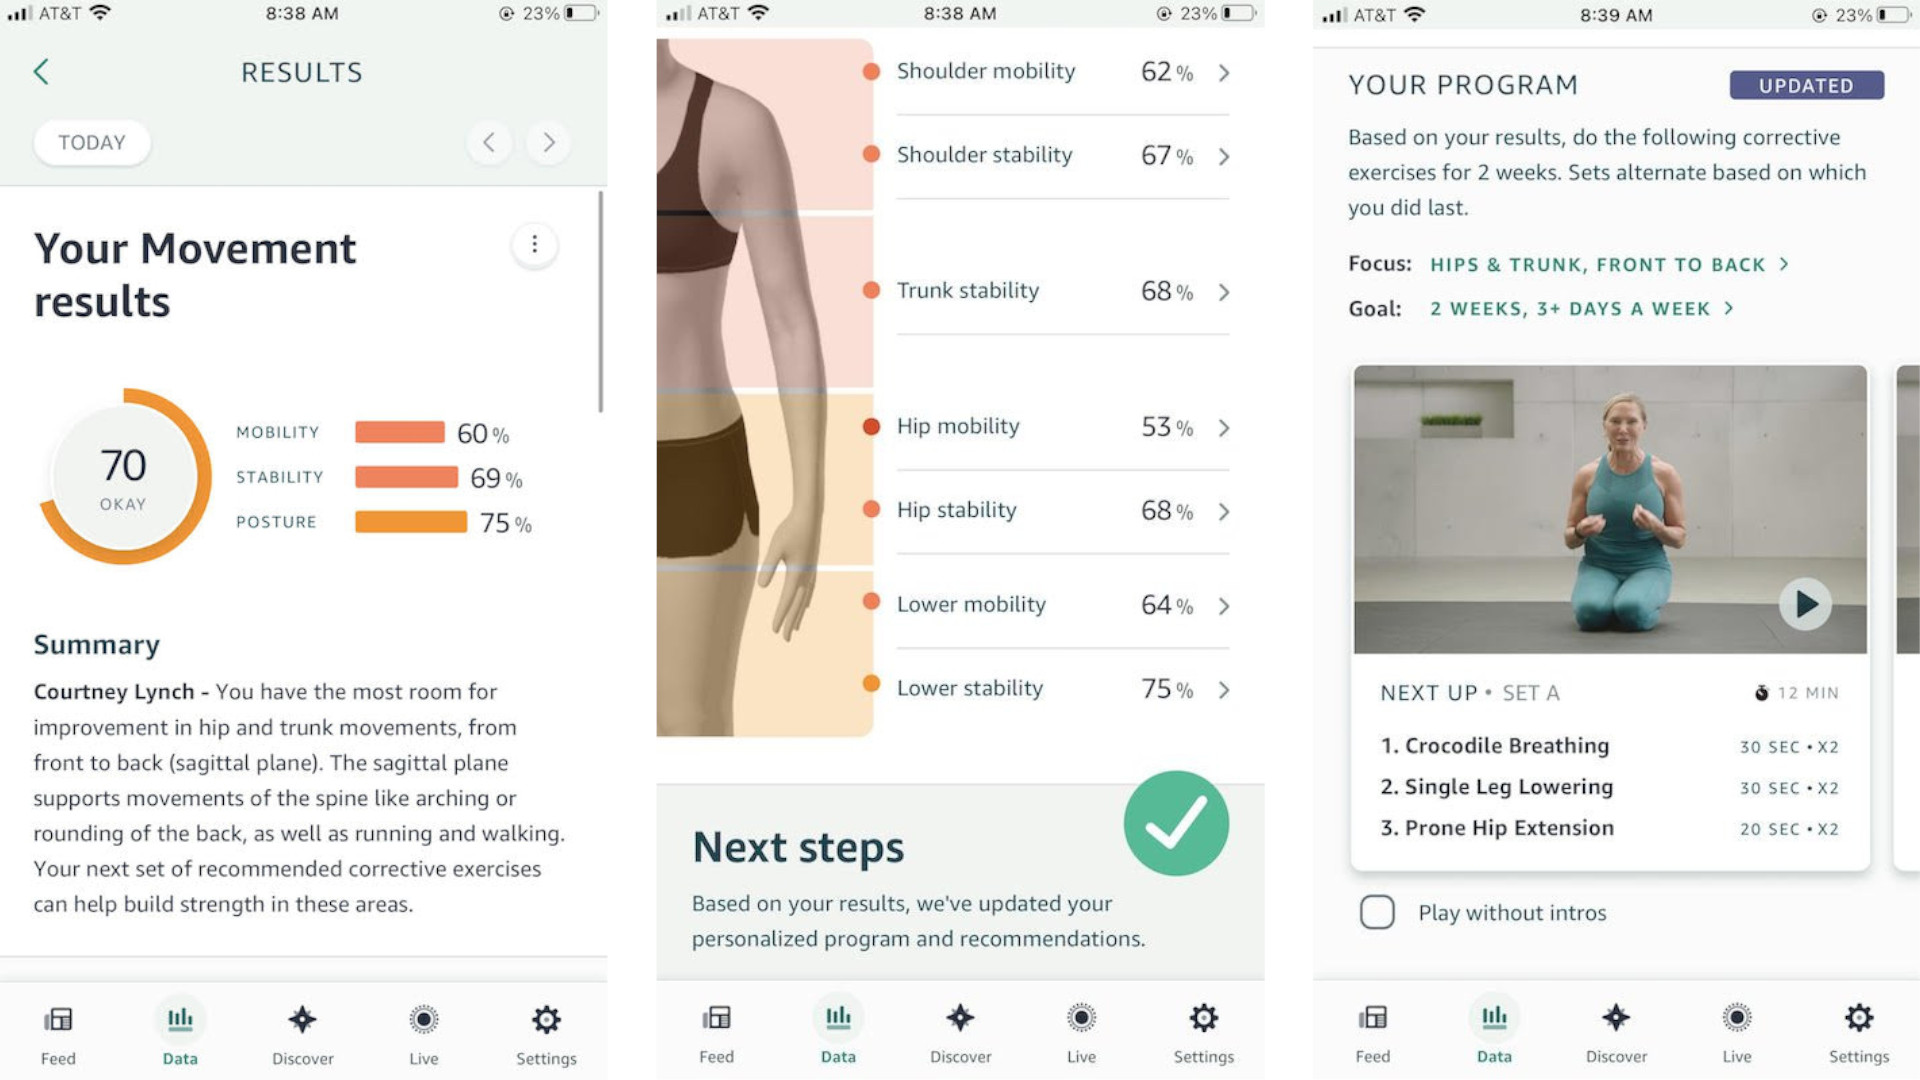 Amazon Halo View app screenshots: Movement results, body composition, and guided programs